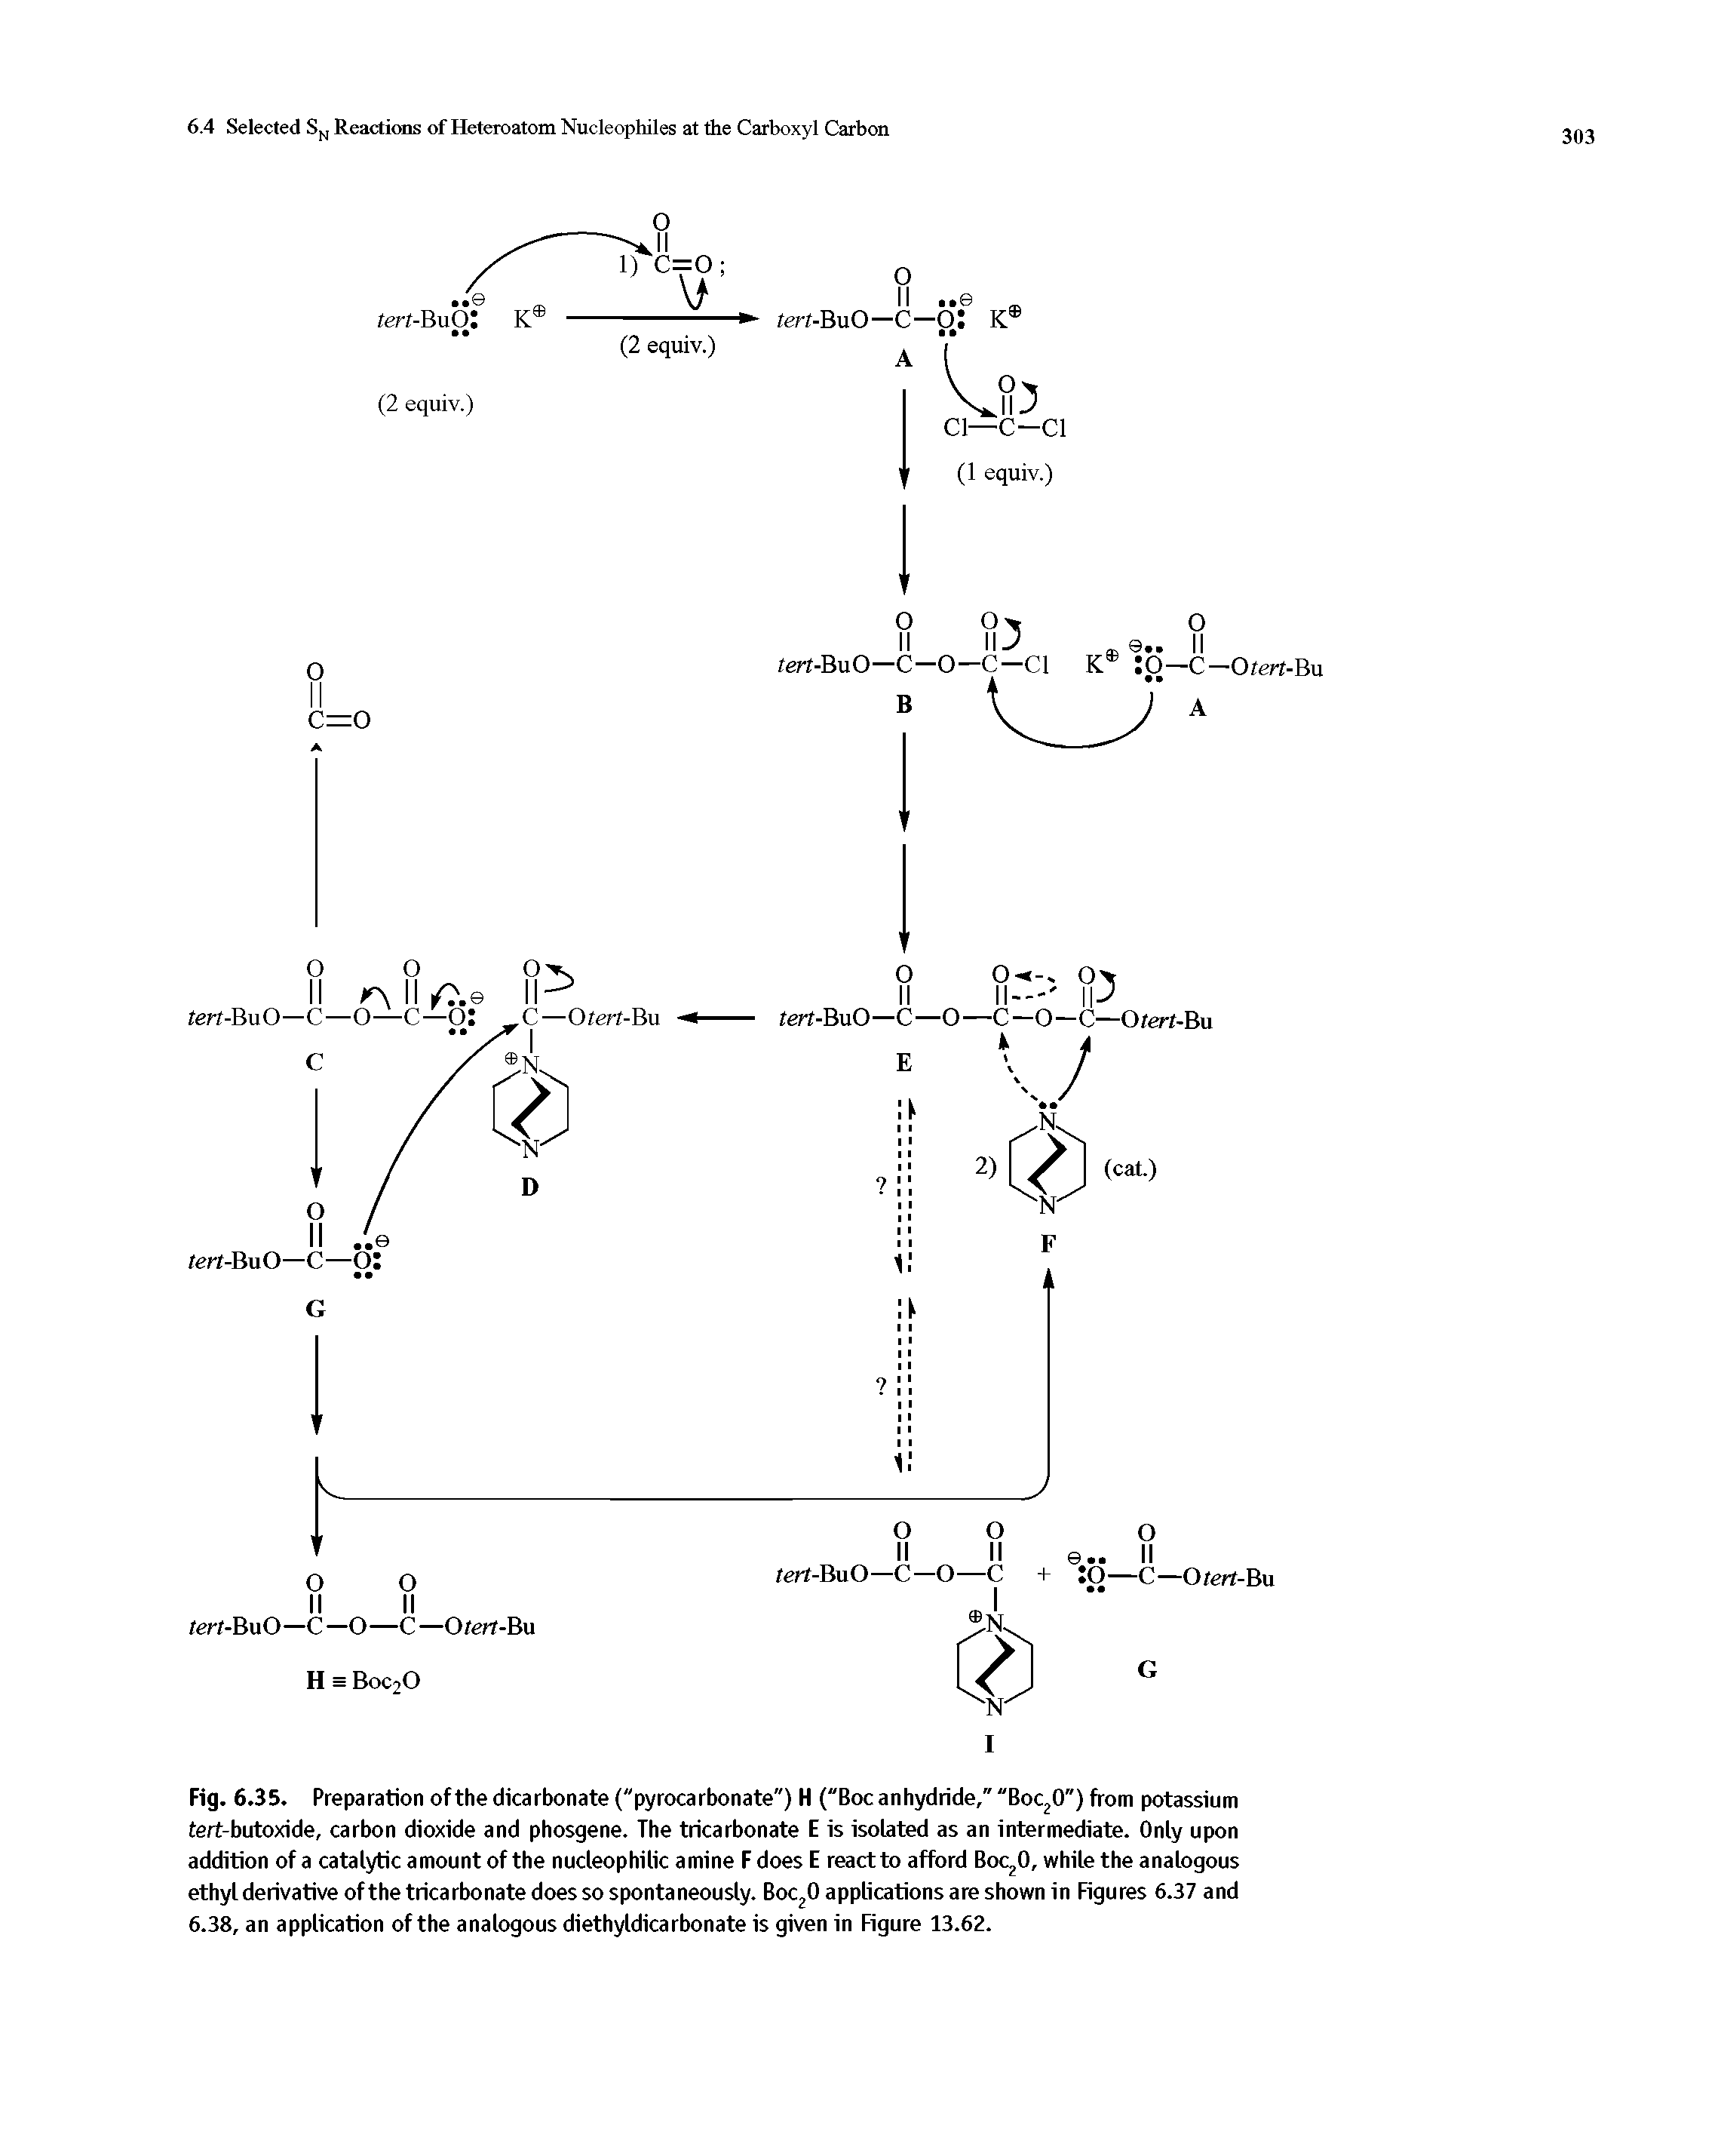 Fig. 6. 35. Preparation of the dicarbonate ("pyrocarbonate") H ("Boc anhydride," "Boc20") from potassium tert-butoxide, carbon dioxide and phosgene. The tricarbonate E is isolated as an intermediate. Only upon addition of a catalytic amount of the nucleophilic amine F does E react to afford Boc 0, while the analogous ethyl derivative ofthe tricarbonate does so spontaneously. Boc20 applications are shown in Figures 6.37 and 6.38, an application ofthe analogous diethyldicarbonate is given in Figure 13.62.